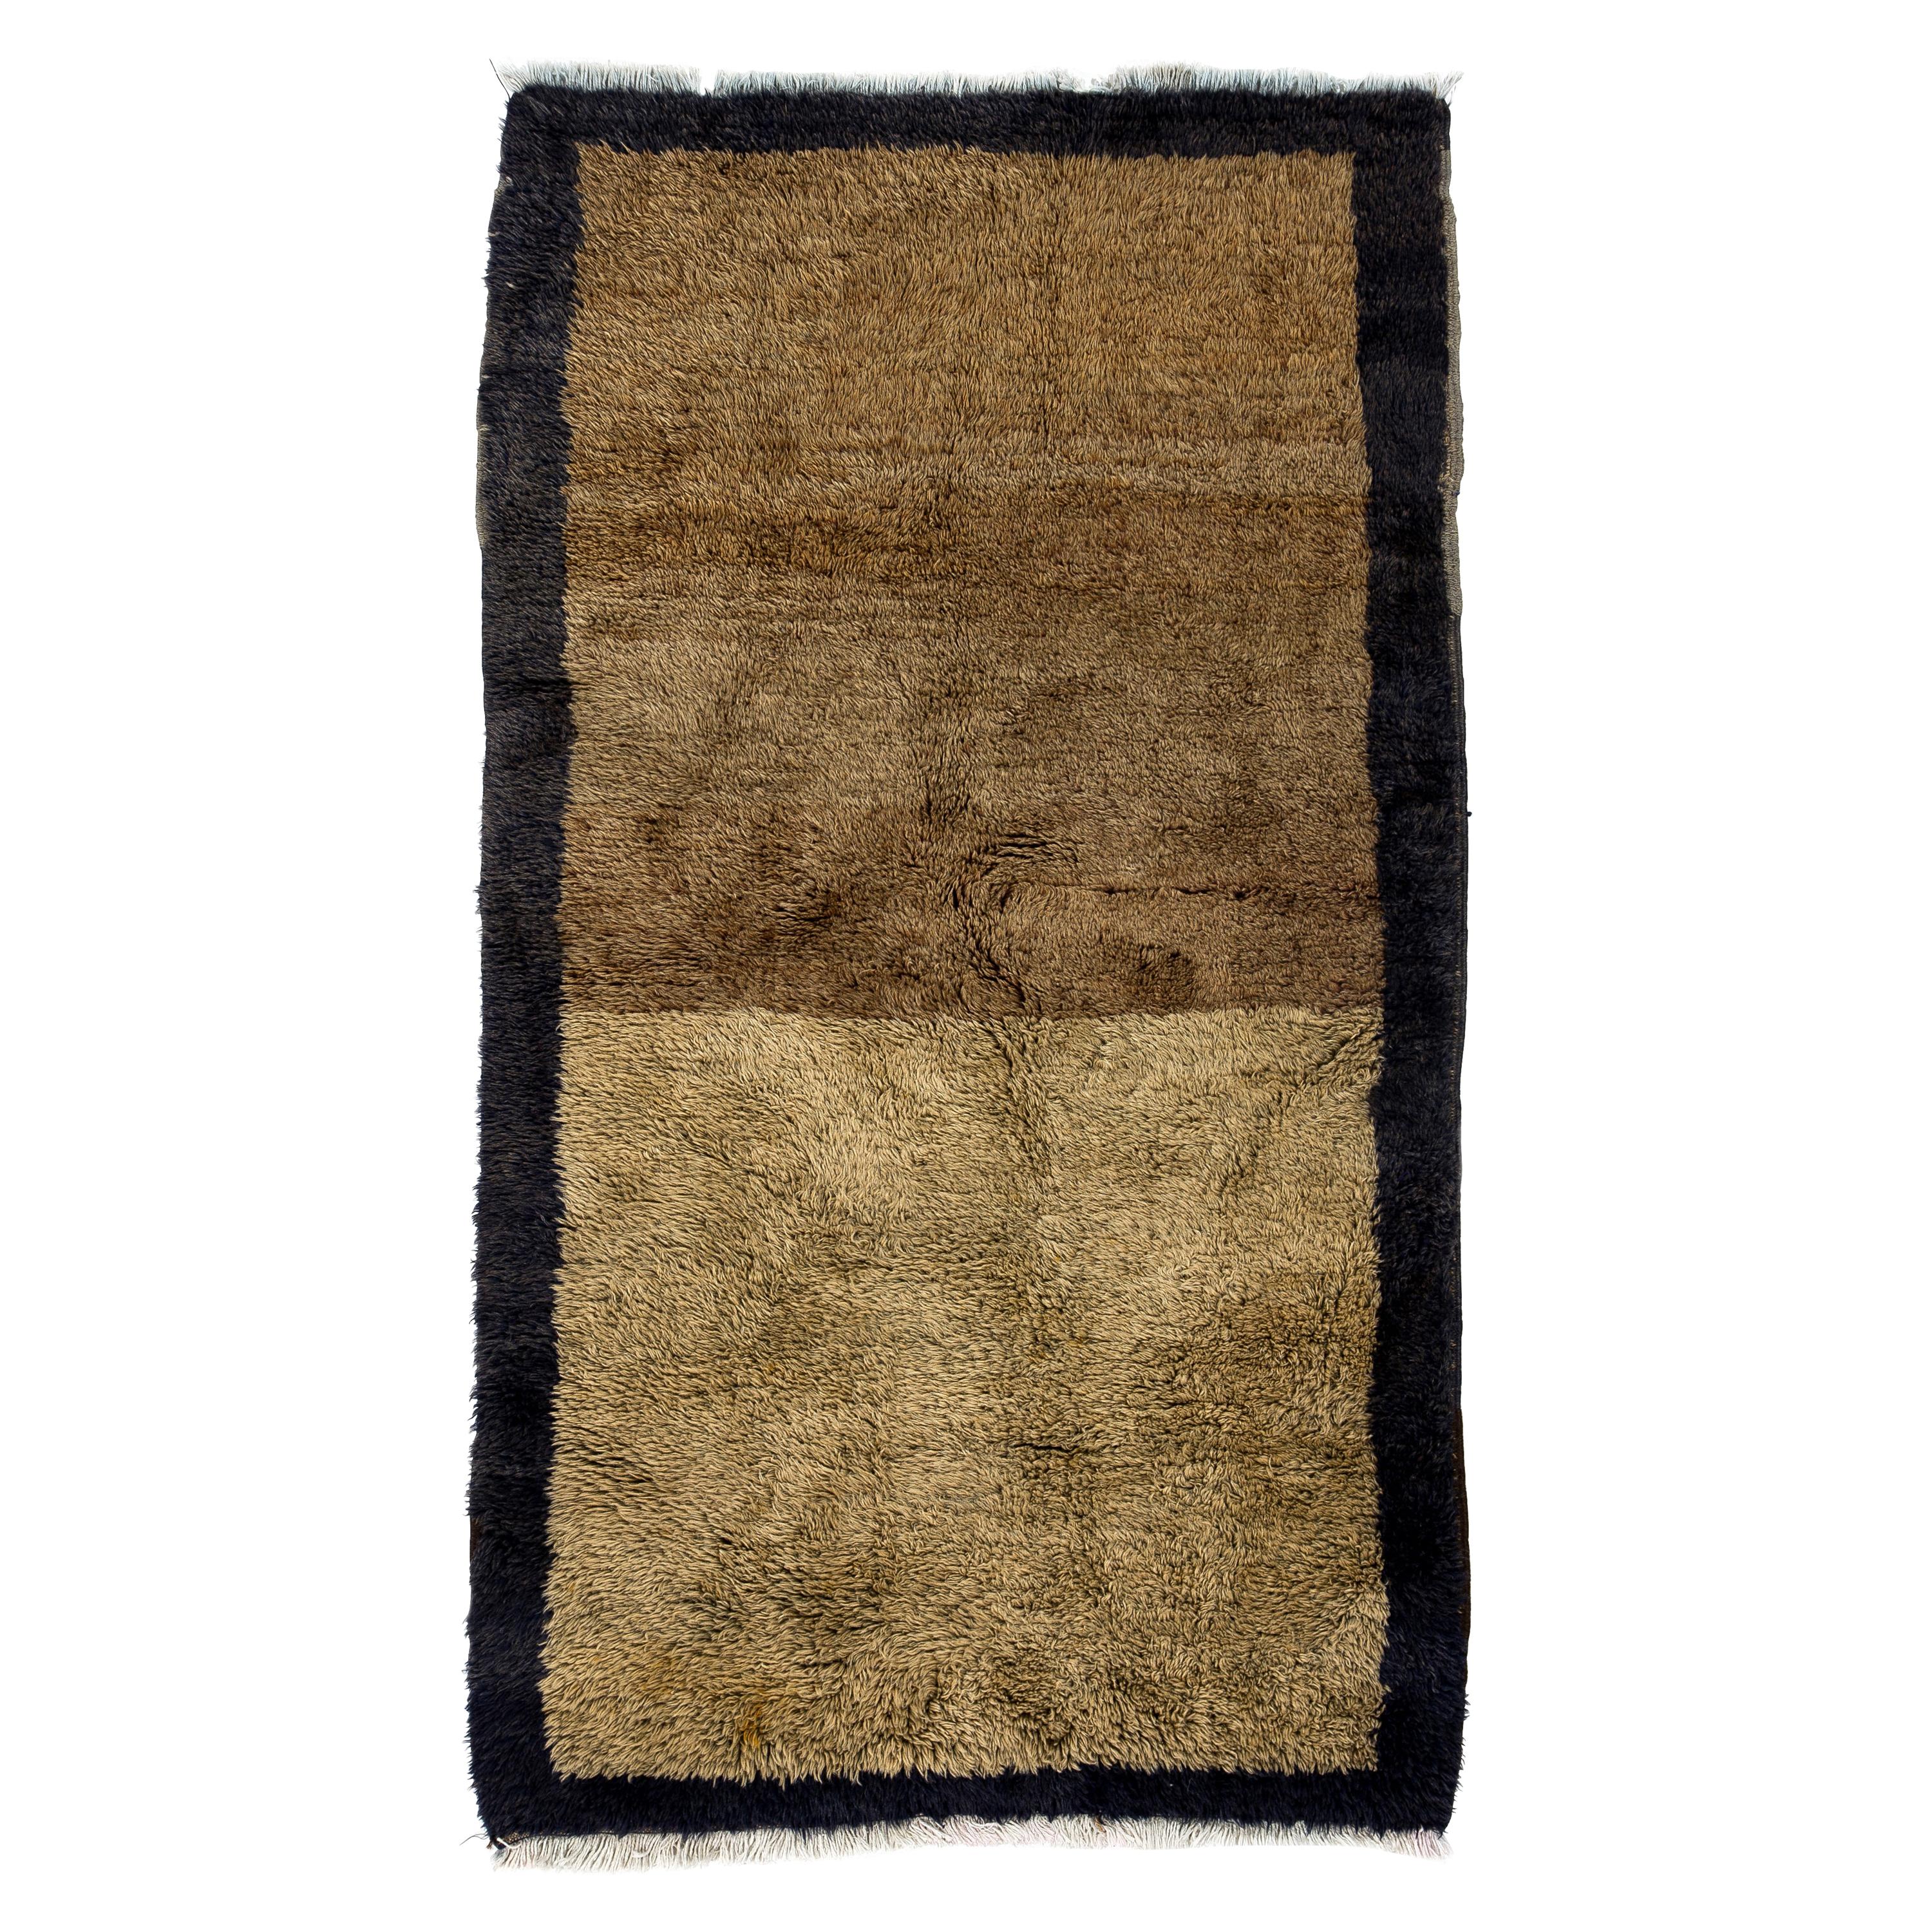 3.2x5.6 Ft Minimalist Anatolian "Tulu" Wool Rug in Light Brown and Camel Colors For Sale